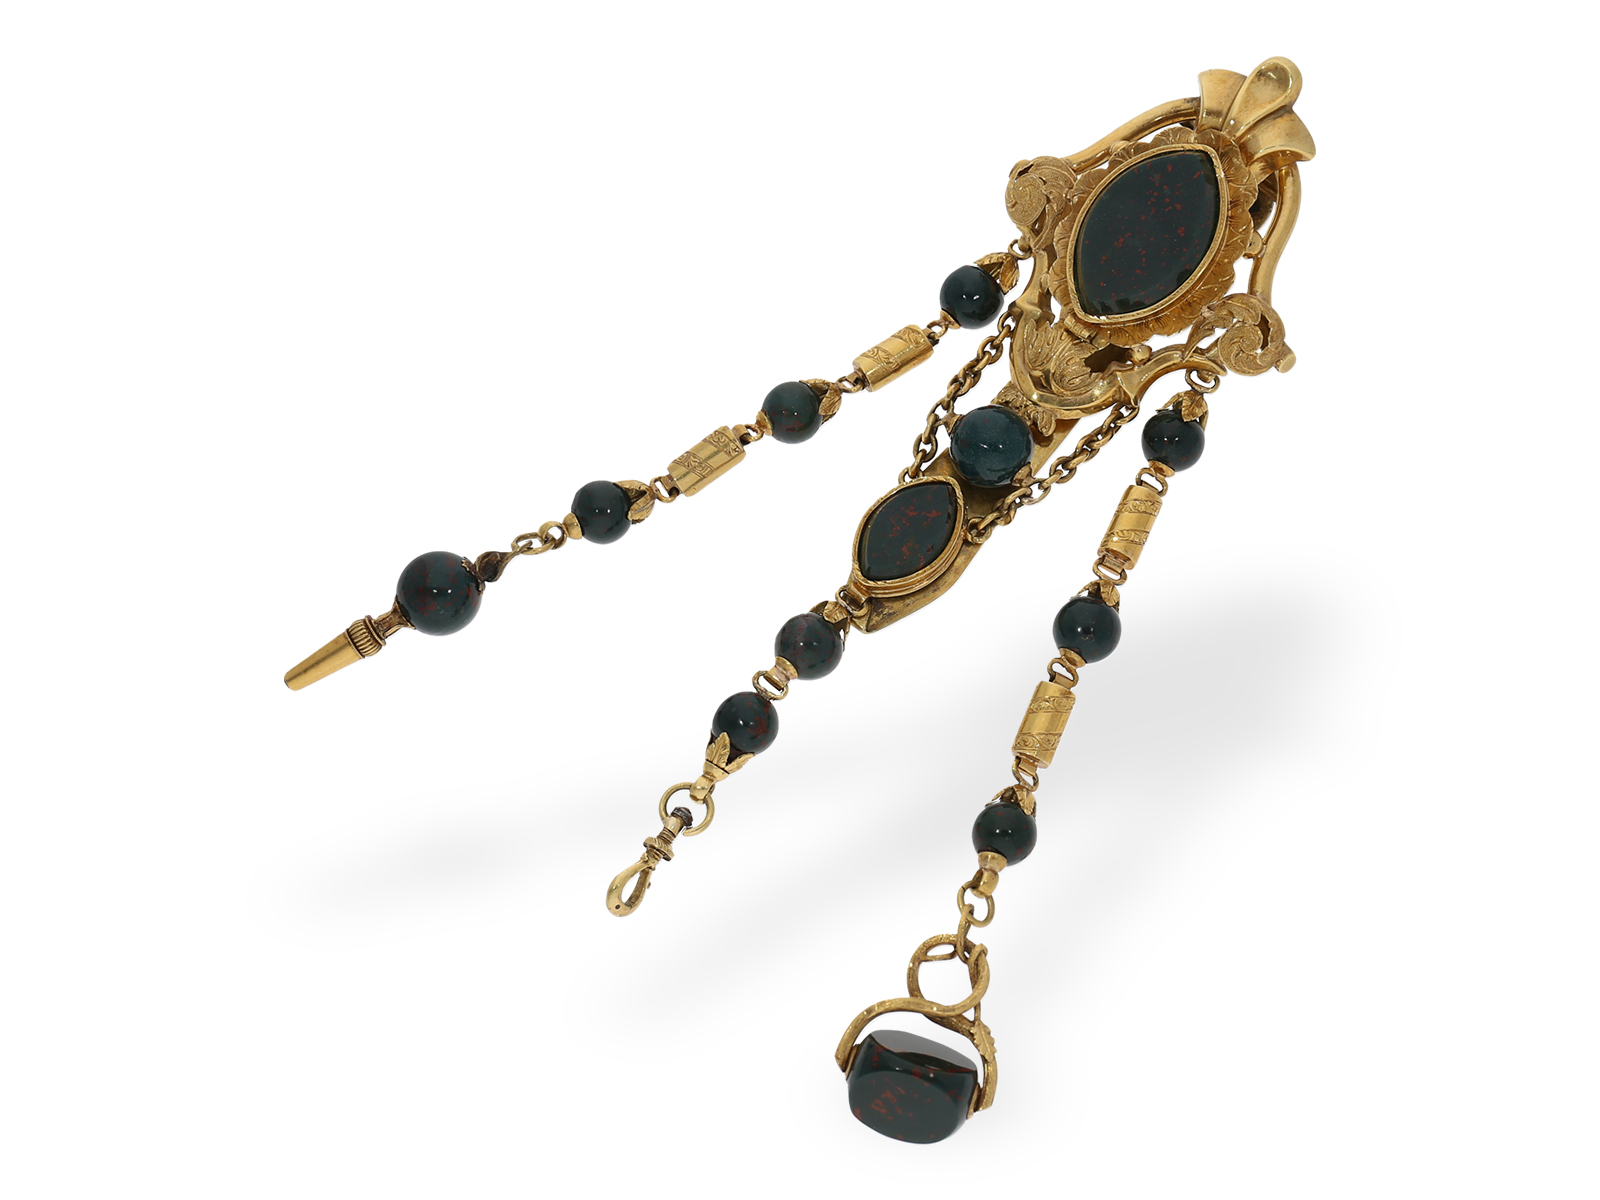 Pocket watch: rare lepine with gold/jasper case and gold/jasper chatelaine, ca. 1850 - Image 2 of 8